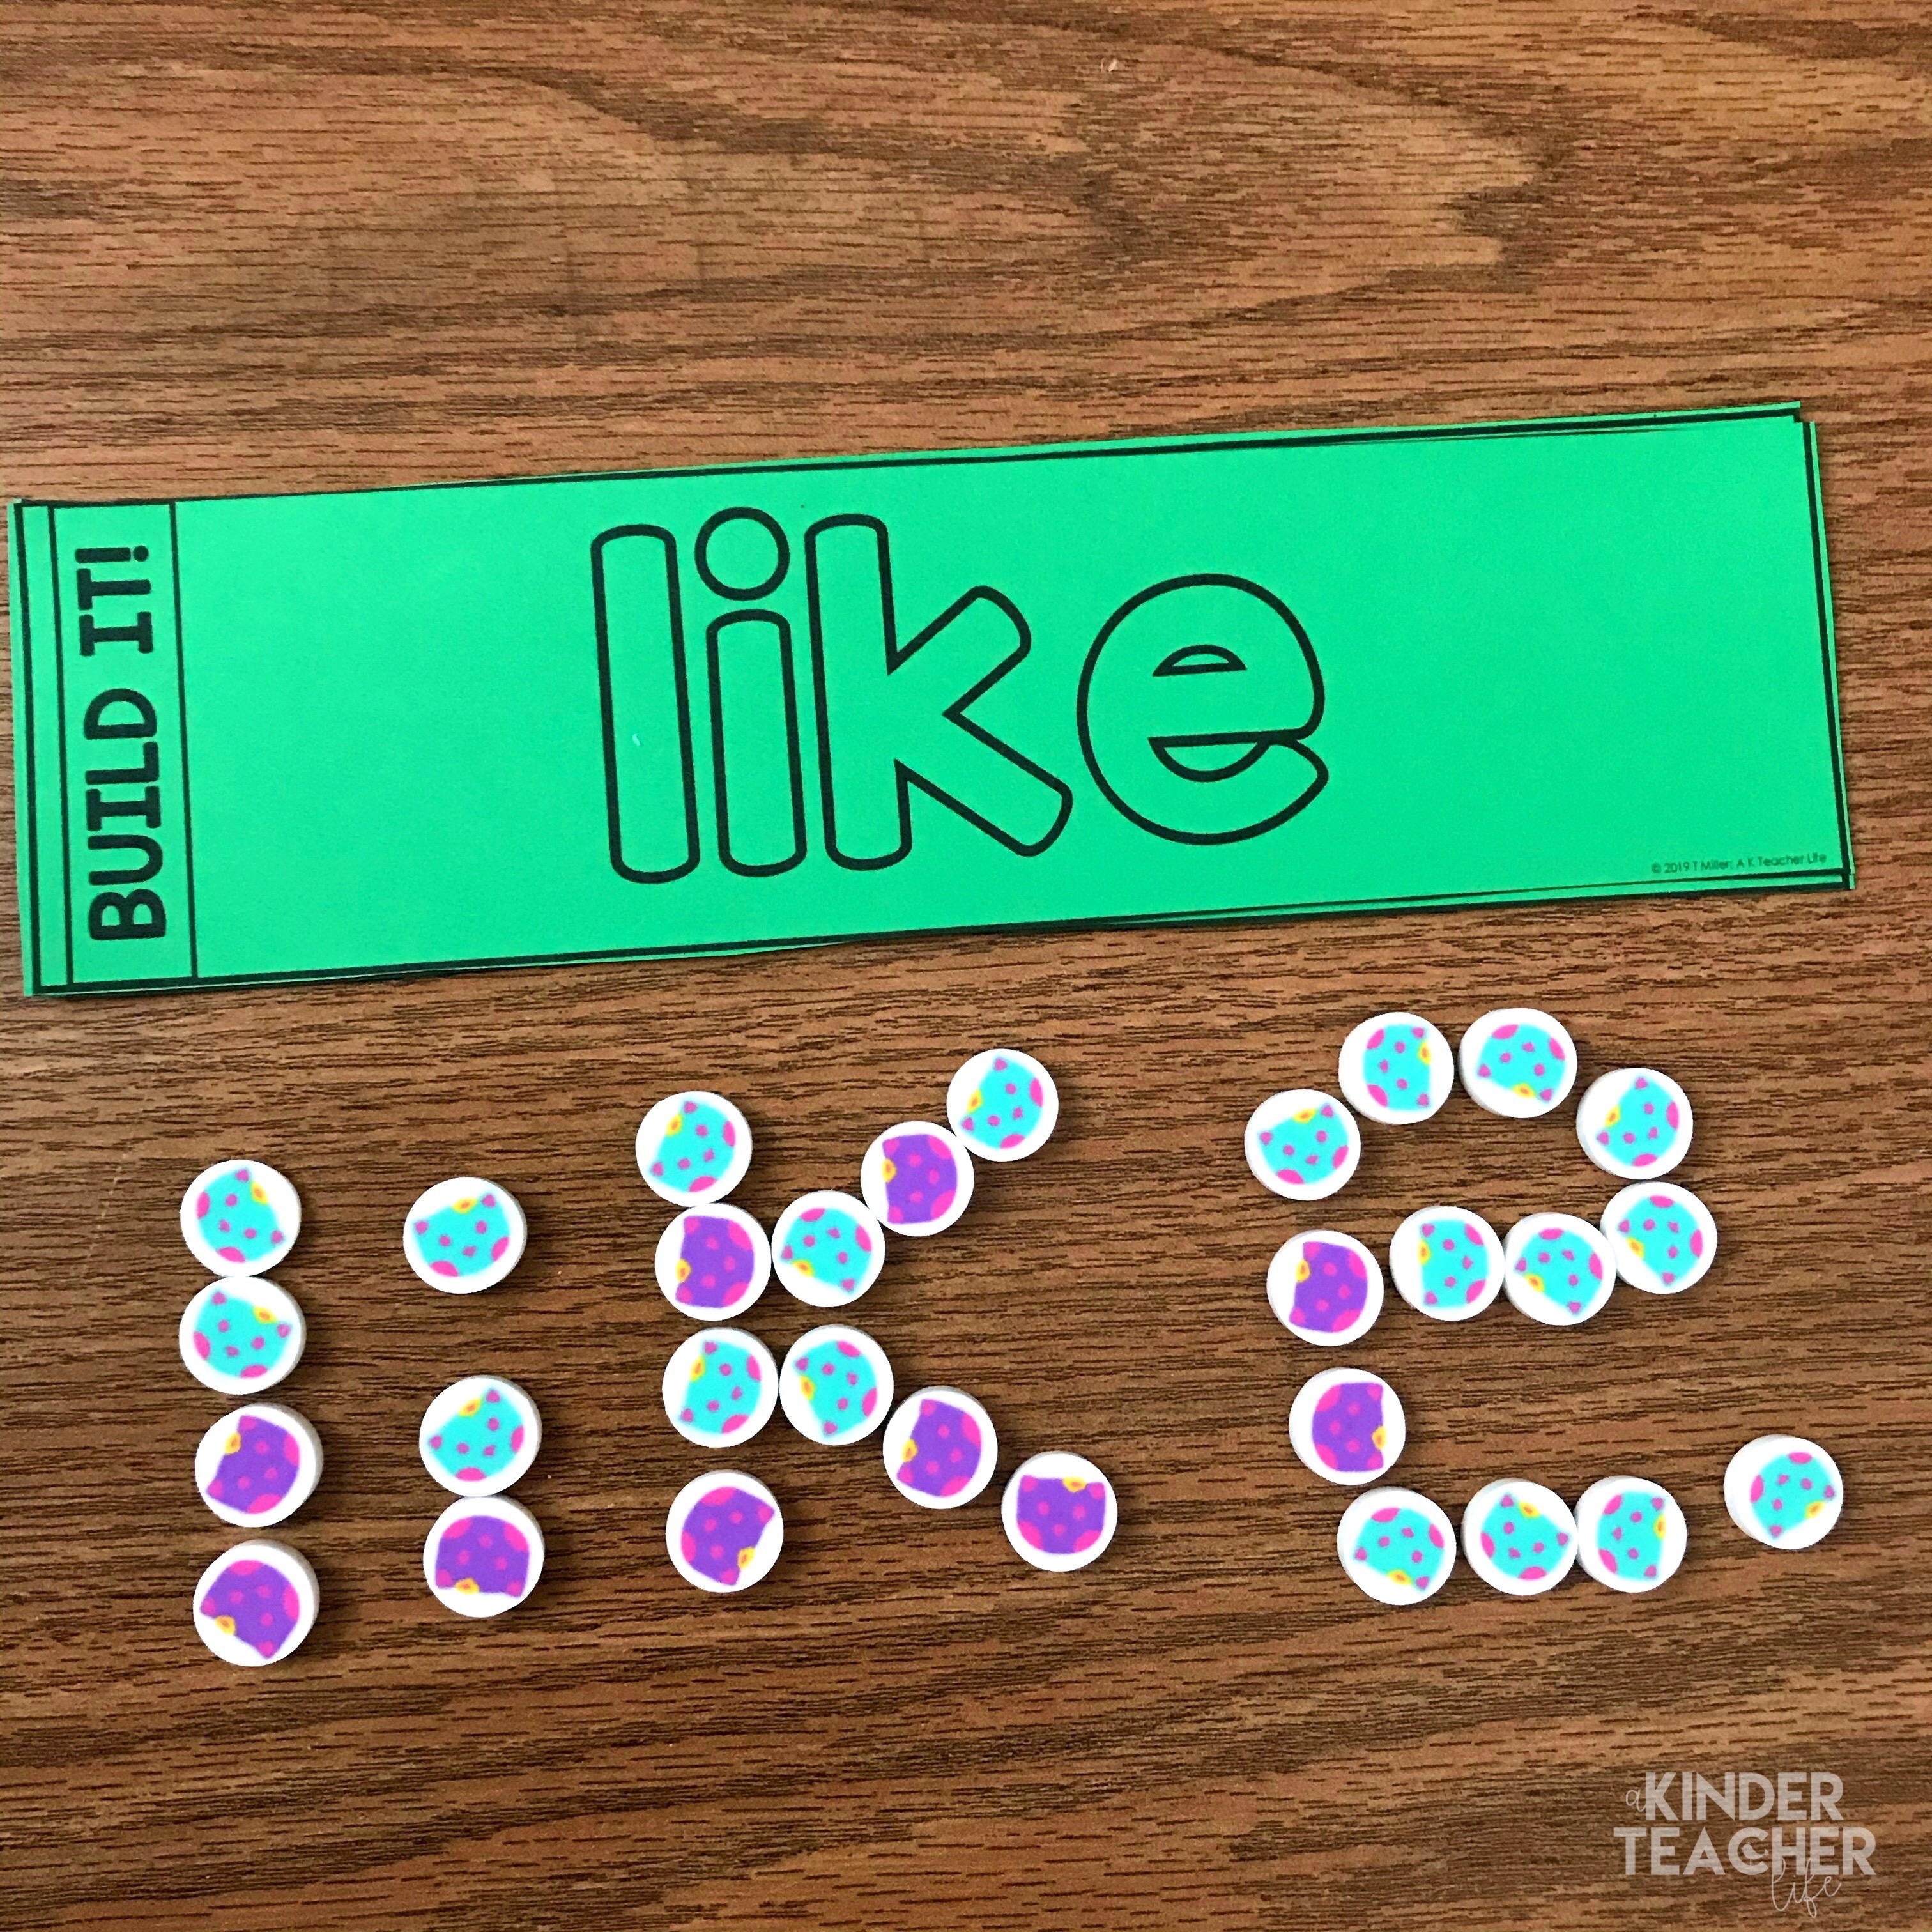 Sight word activity - build the sight word